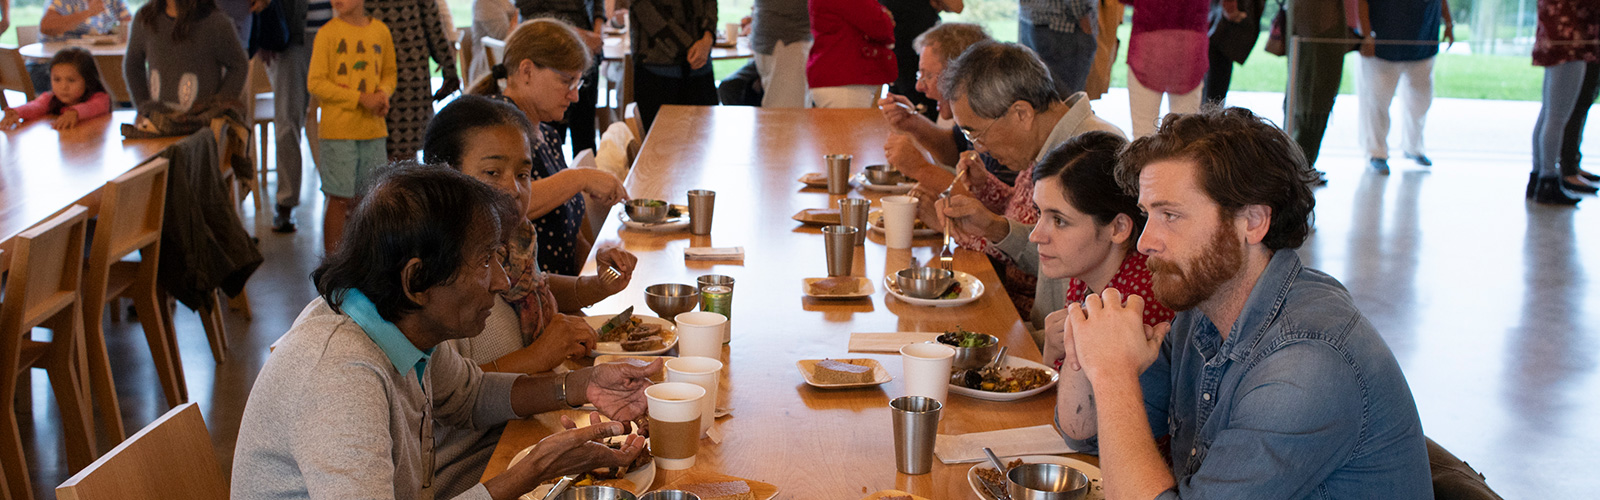 Community Dinner in Grace Farms' Commons